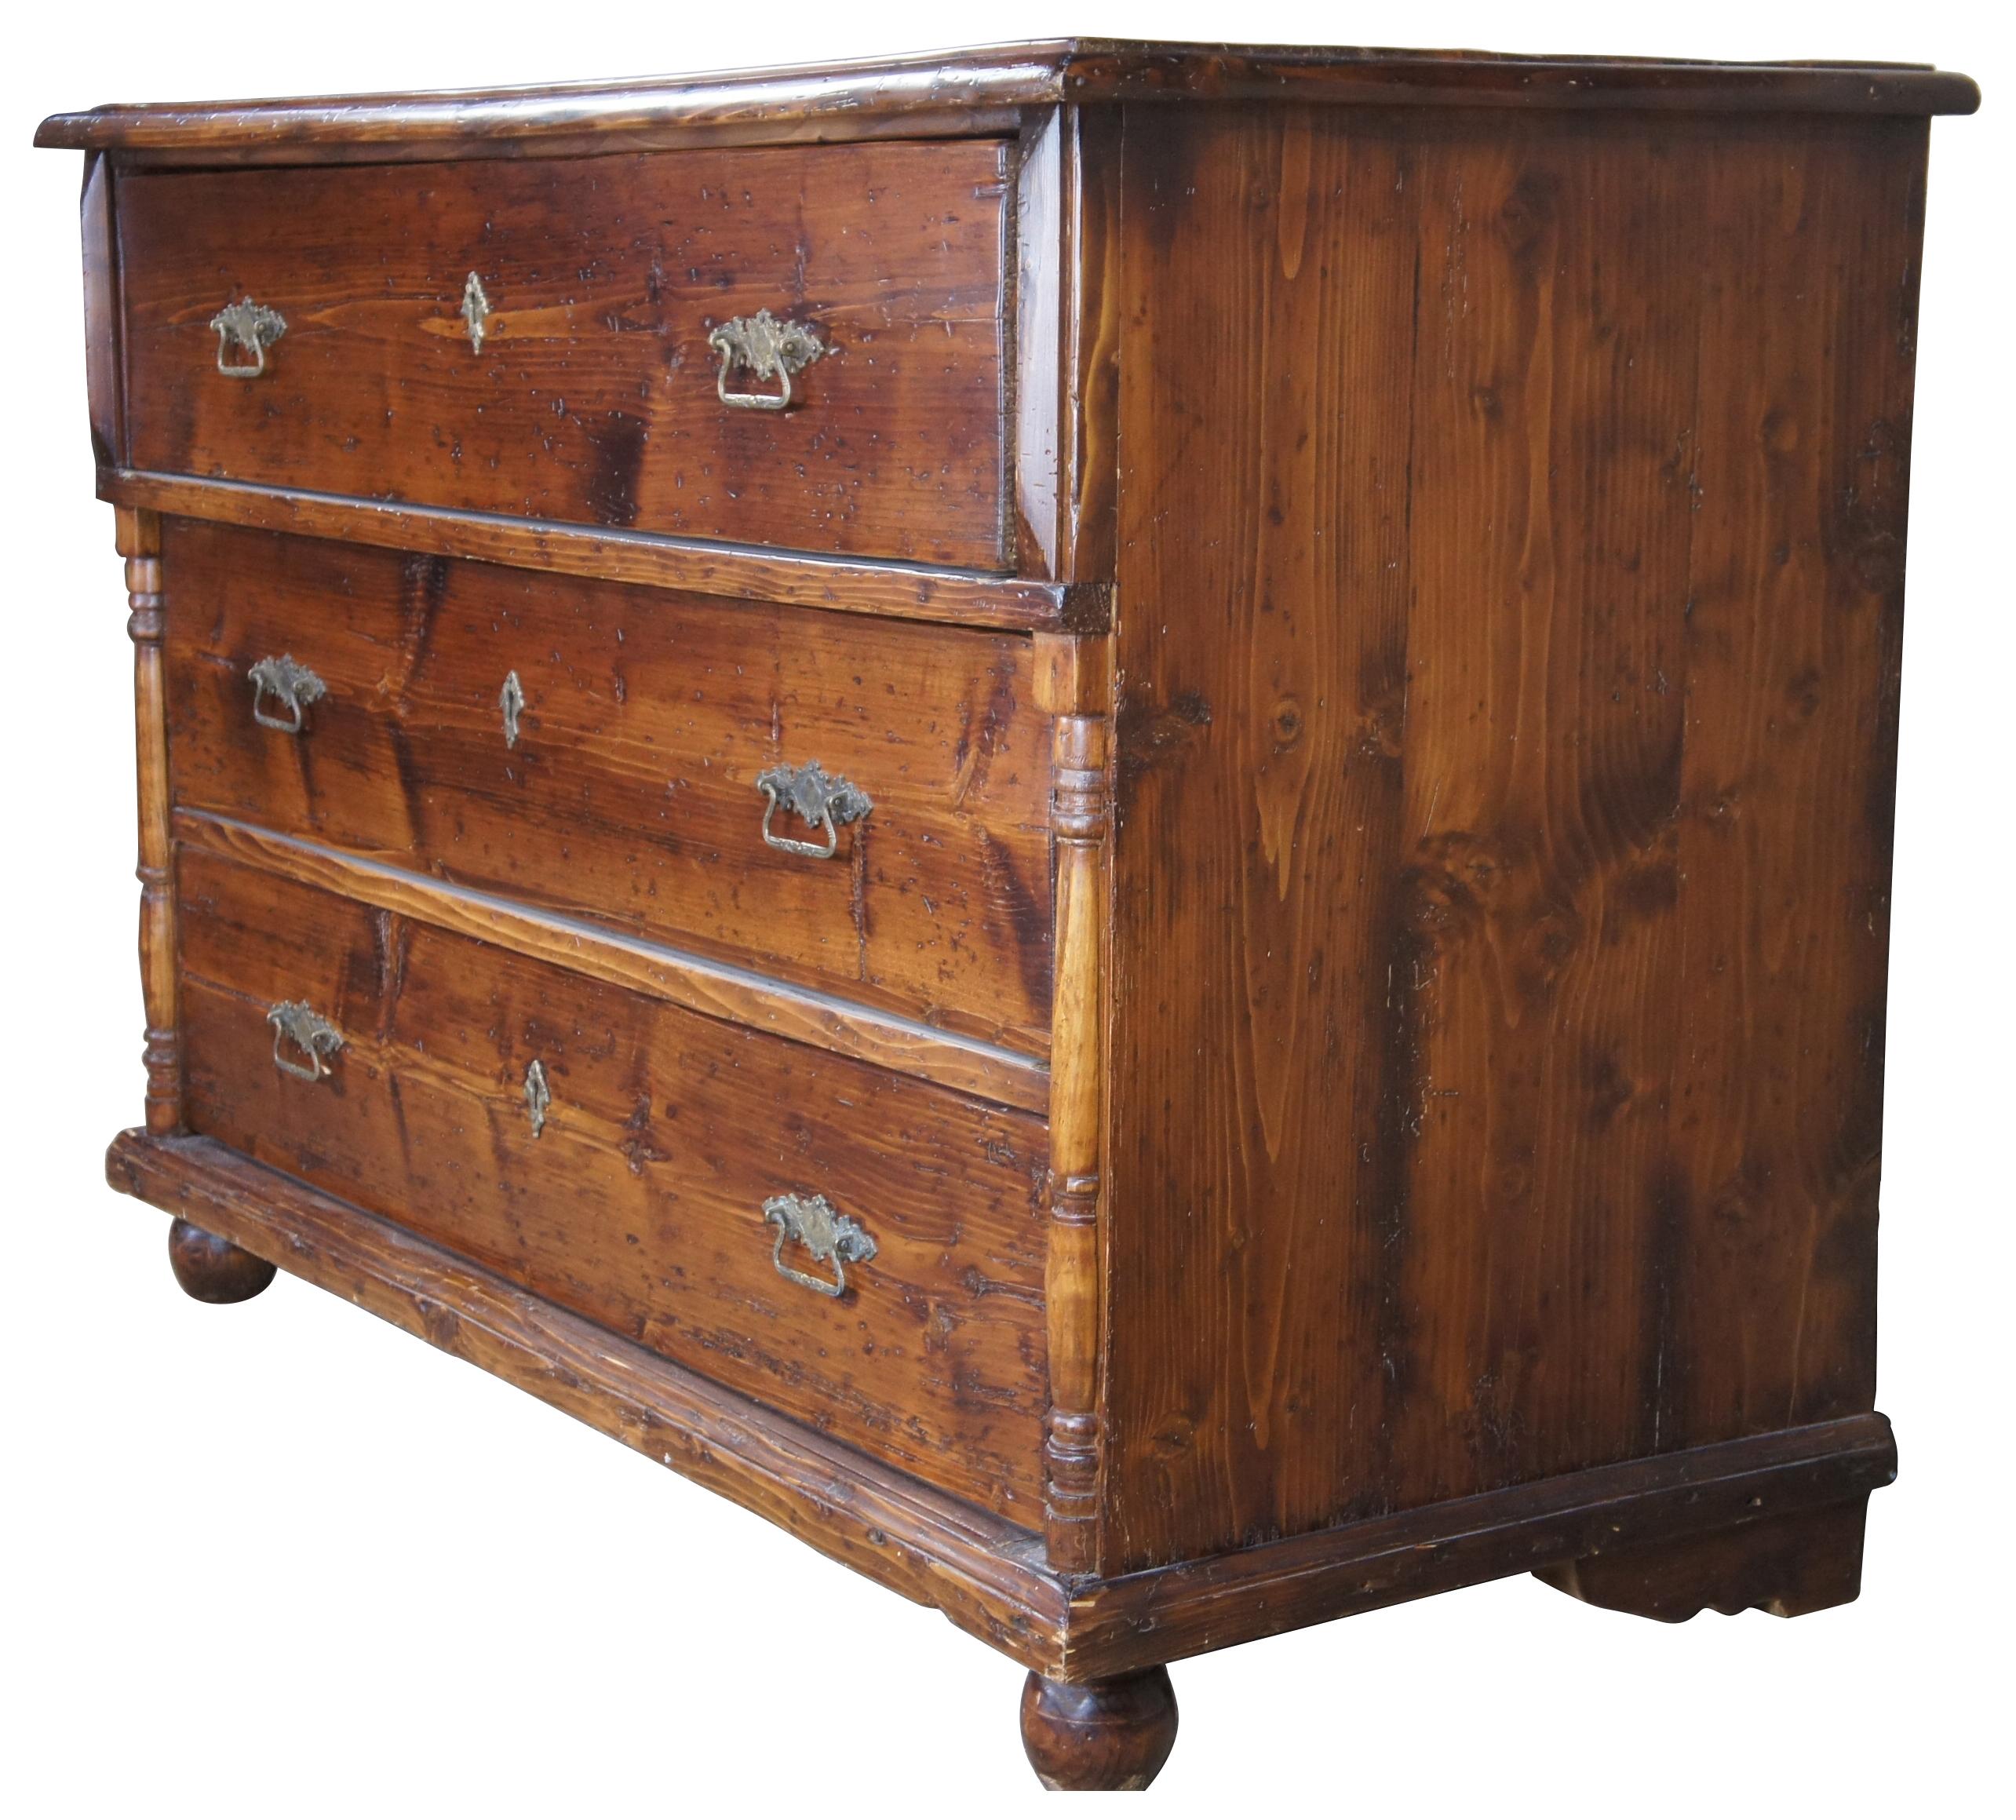 Early 20th century pine chest or dresser. Made of pine, featuring three drawers and half turned baluster mounts over bune feet. Naturally distressed with brass hardware. Measure: 53